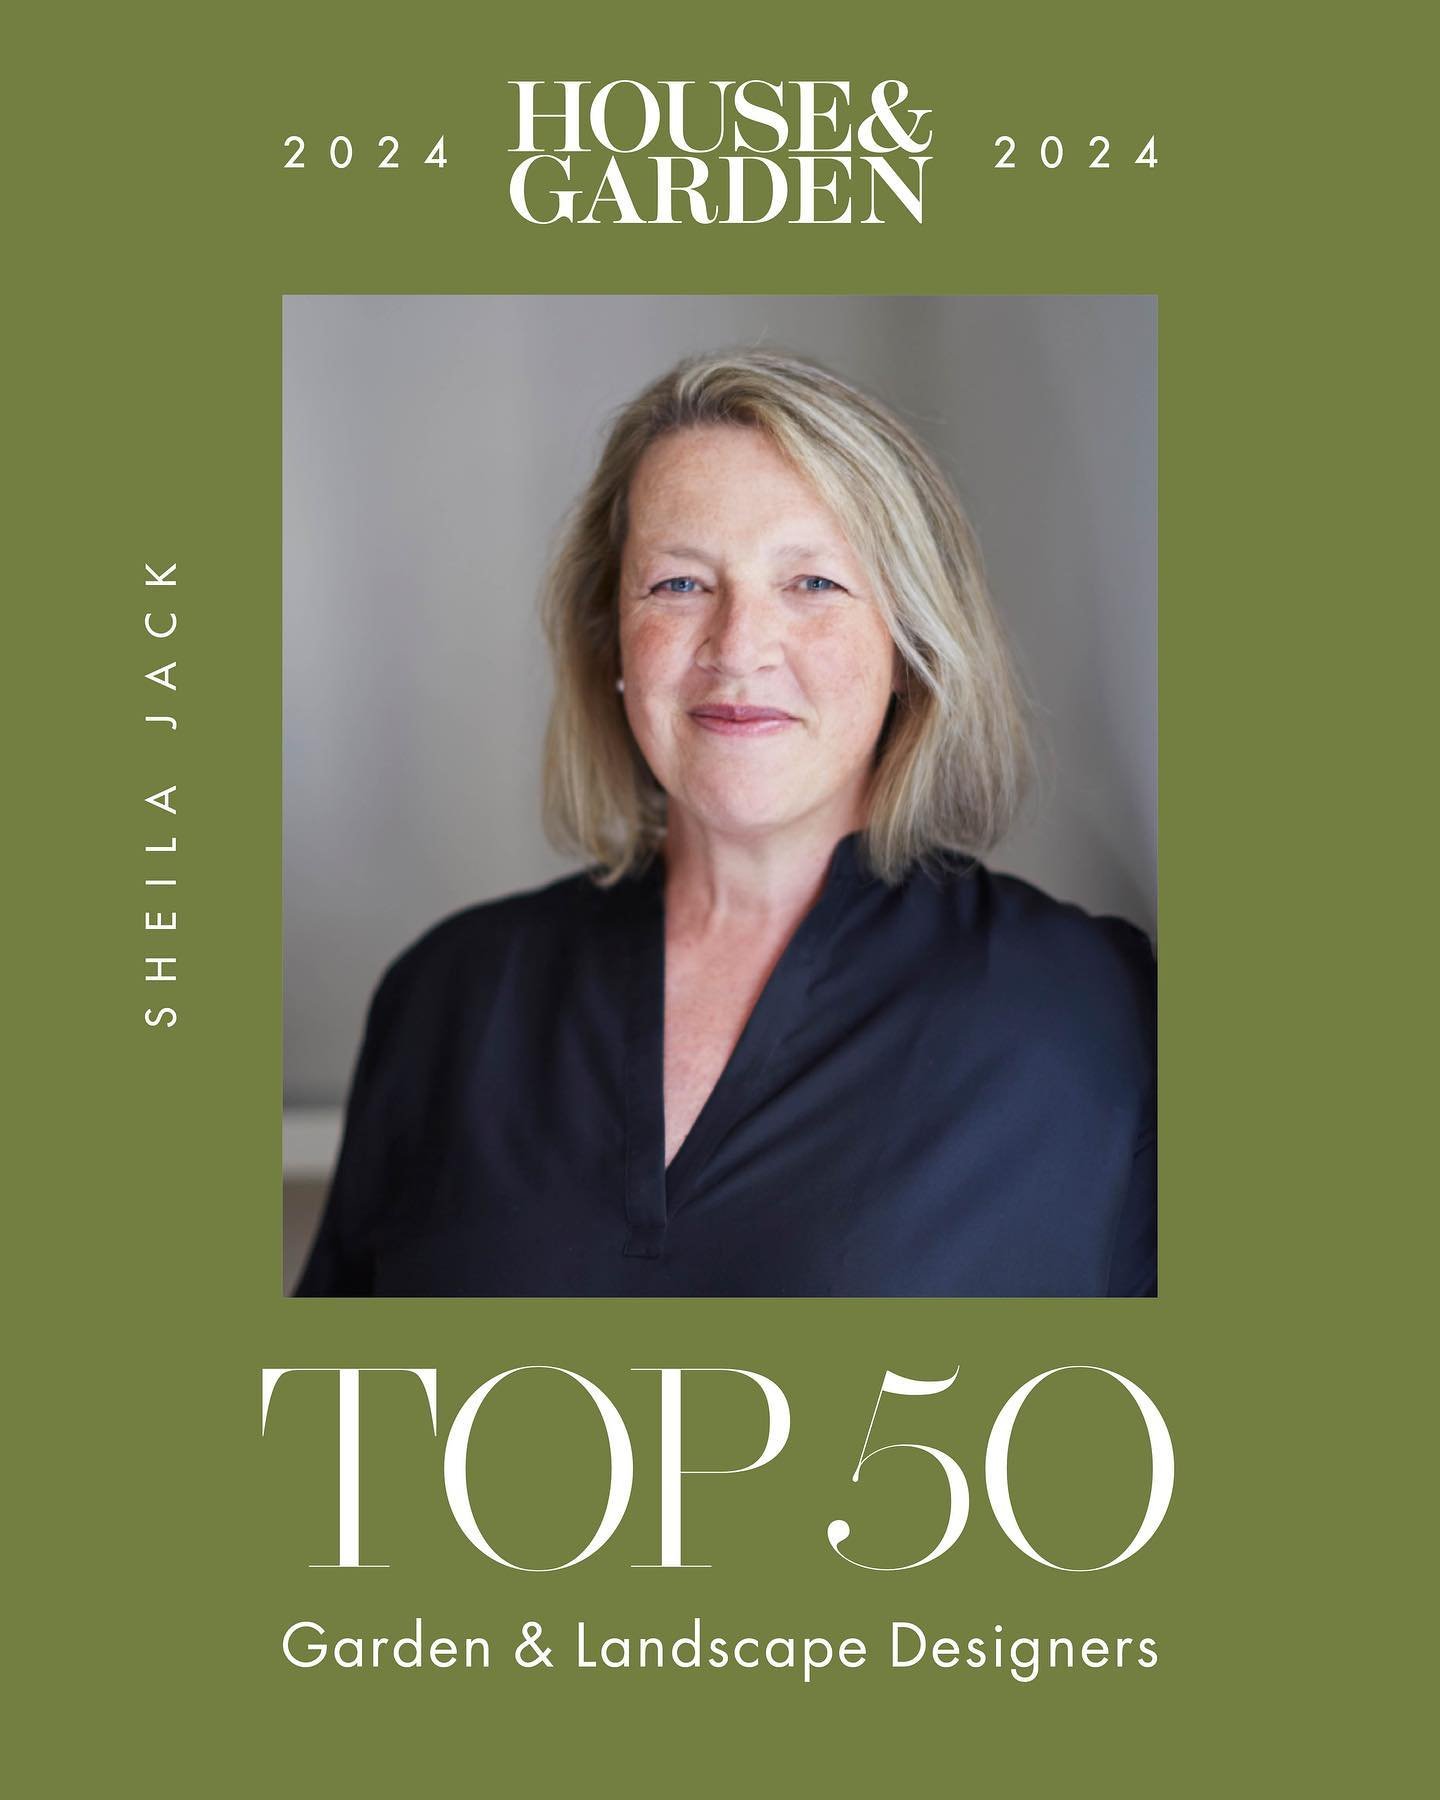 So honoured to be included in this year&rsquo;s House &amp; Garden list of the Top 50 Garden Designers alongside so many of my garden heroes. 

A huge thank you to @houseandgardenuk for your wonderful support, to @hattabyng @clarefostergardens and @g